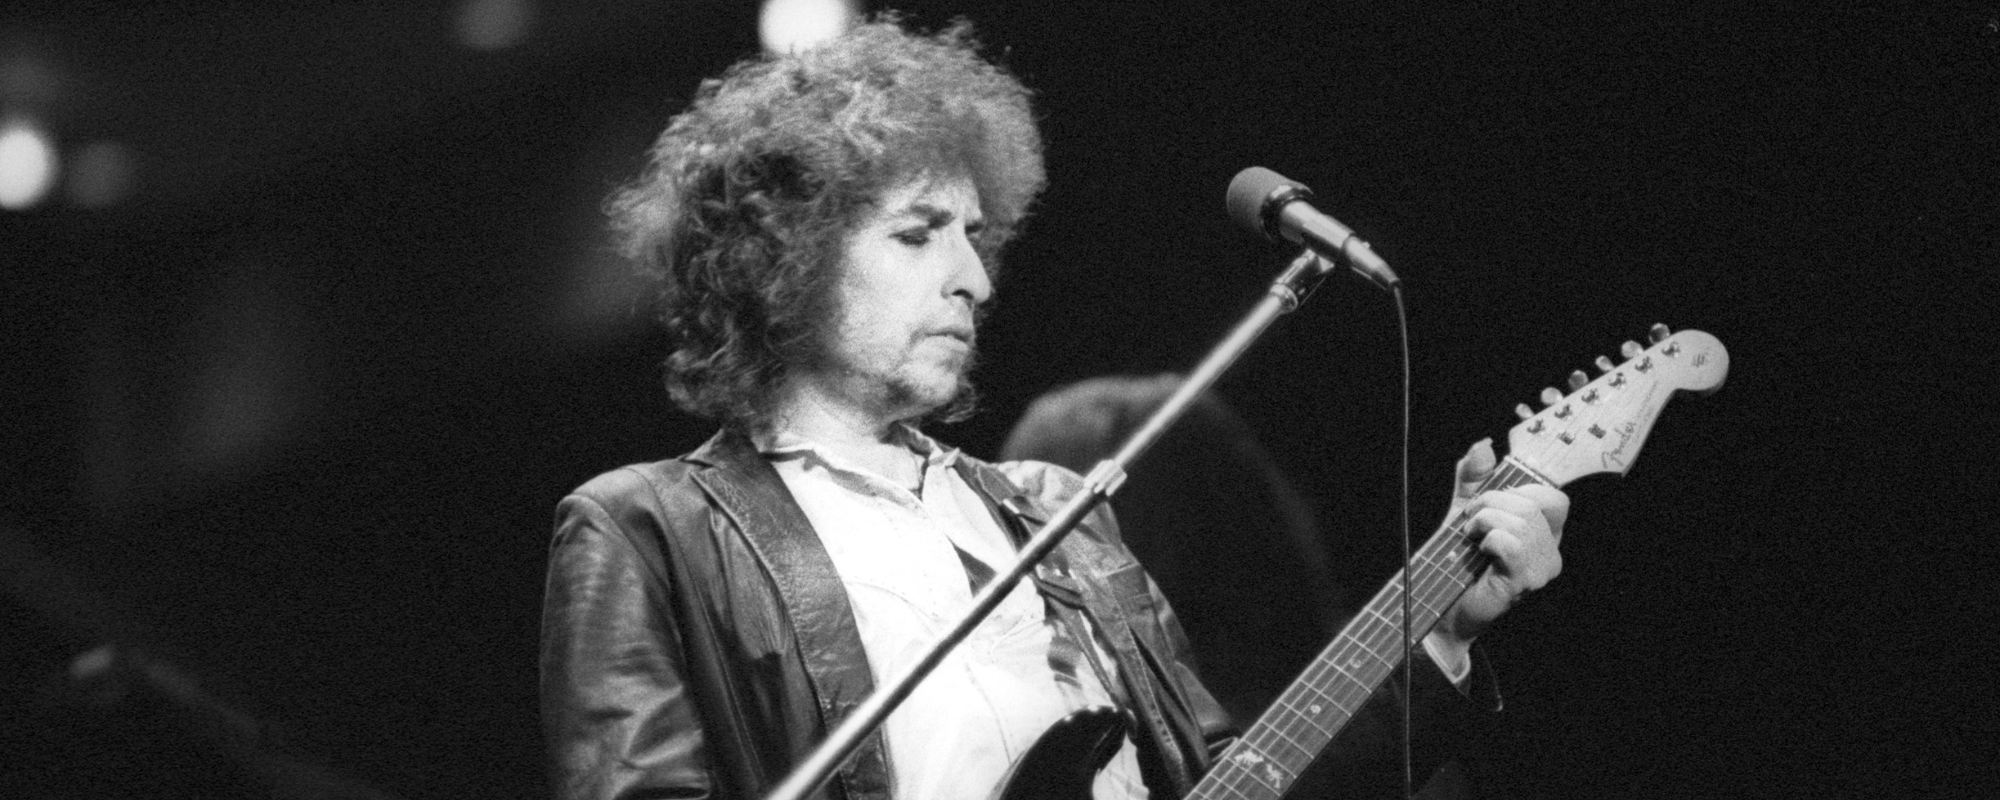 5 Times Bob Dylan Baffled Us By Leaving Great Songs on the Cutting Room Floor